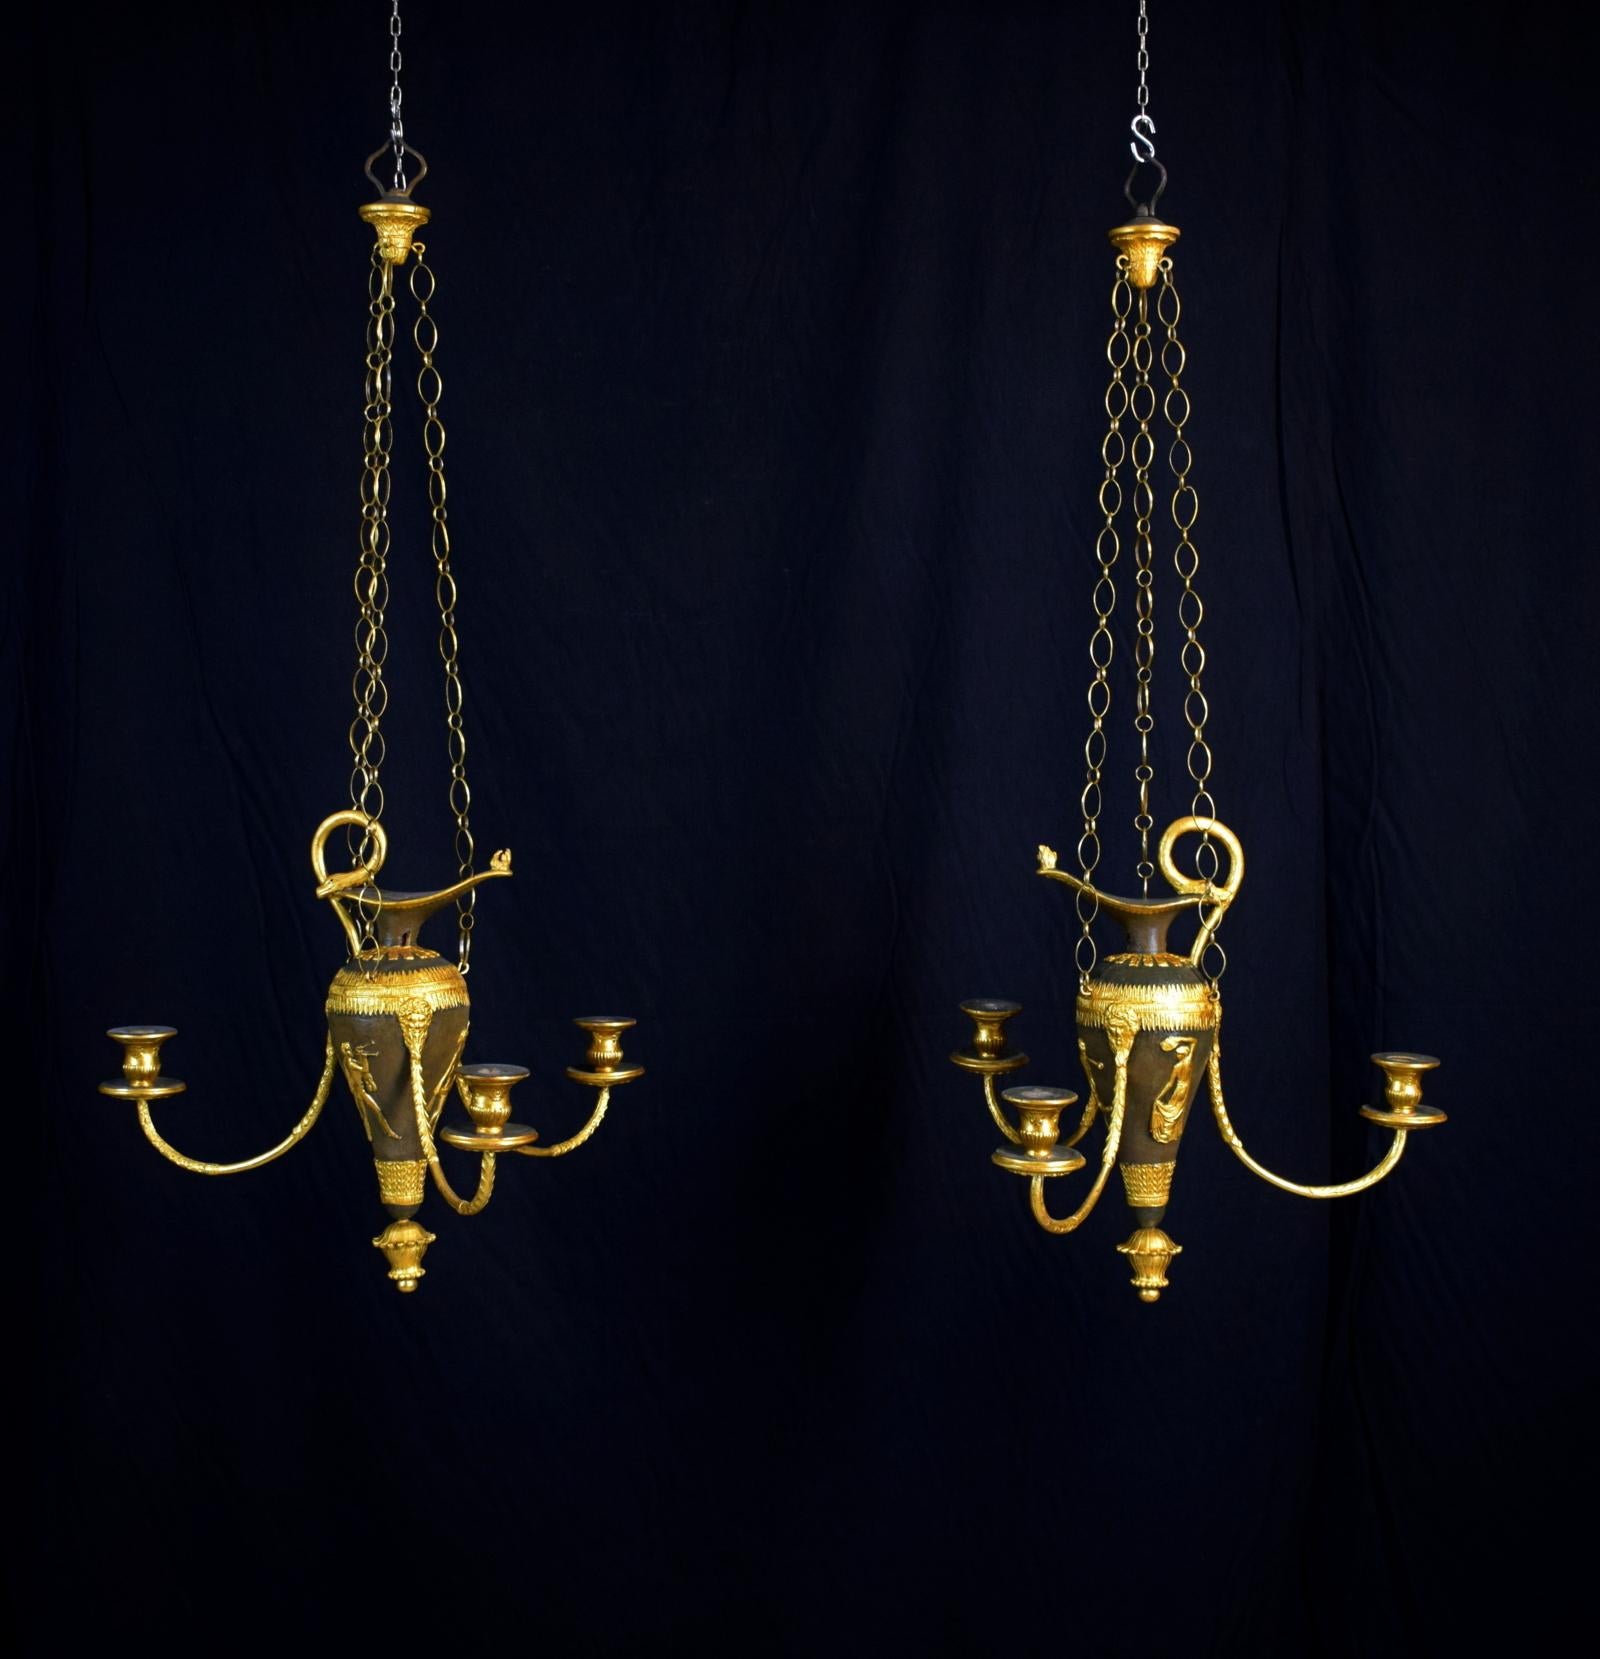 Neoclassical 18th Century, Pair of Italian Lacquered Wood and Gilded Pastiglia Chandeliers